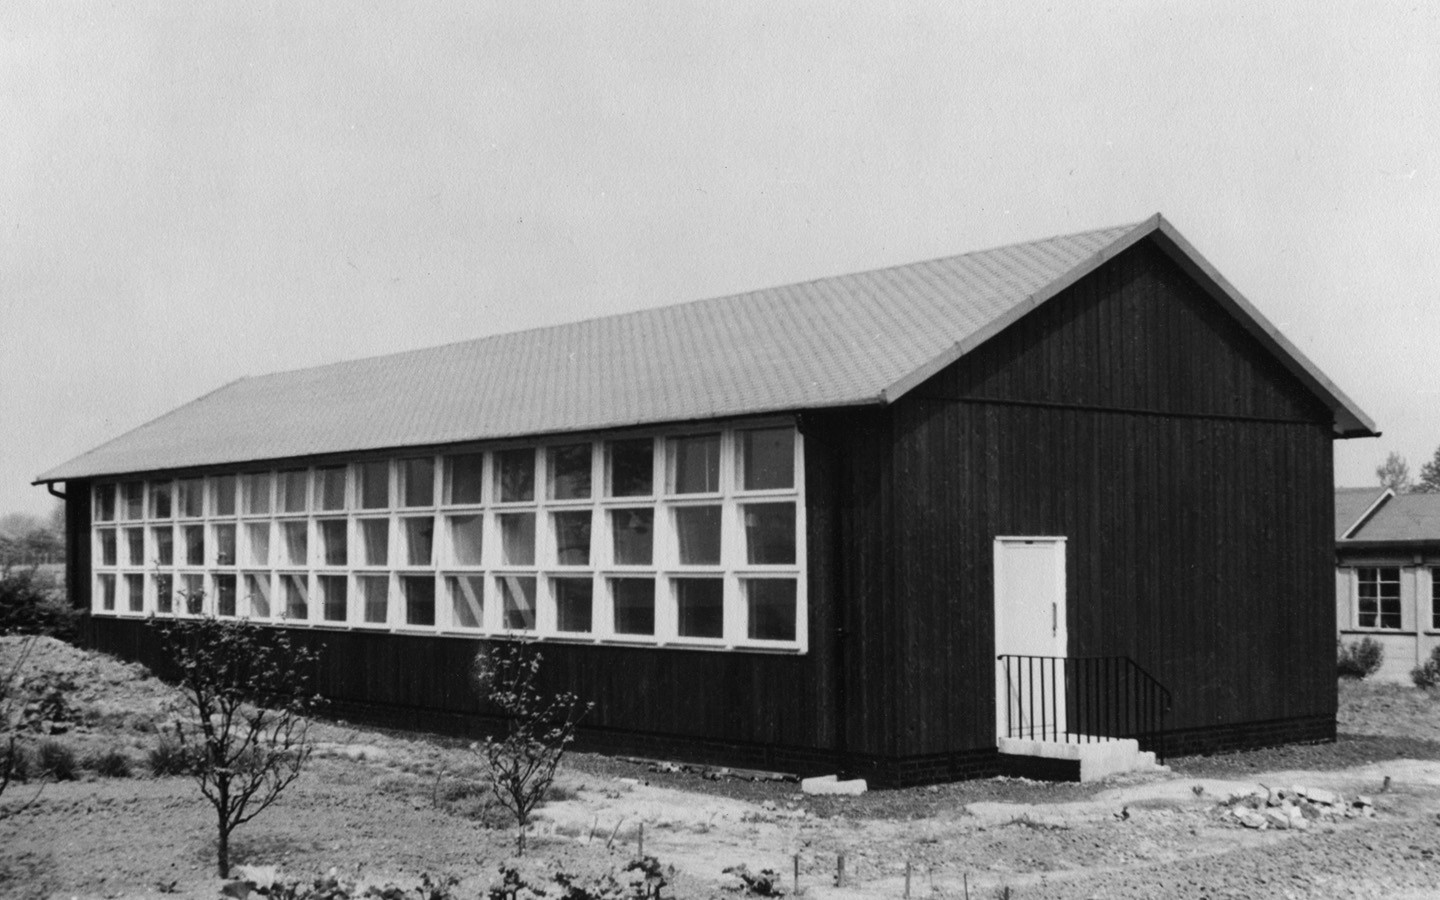 An old black and white photo of a wooden Puutalo school. On the wall there are 3 rows of windows with 16 windows in each.